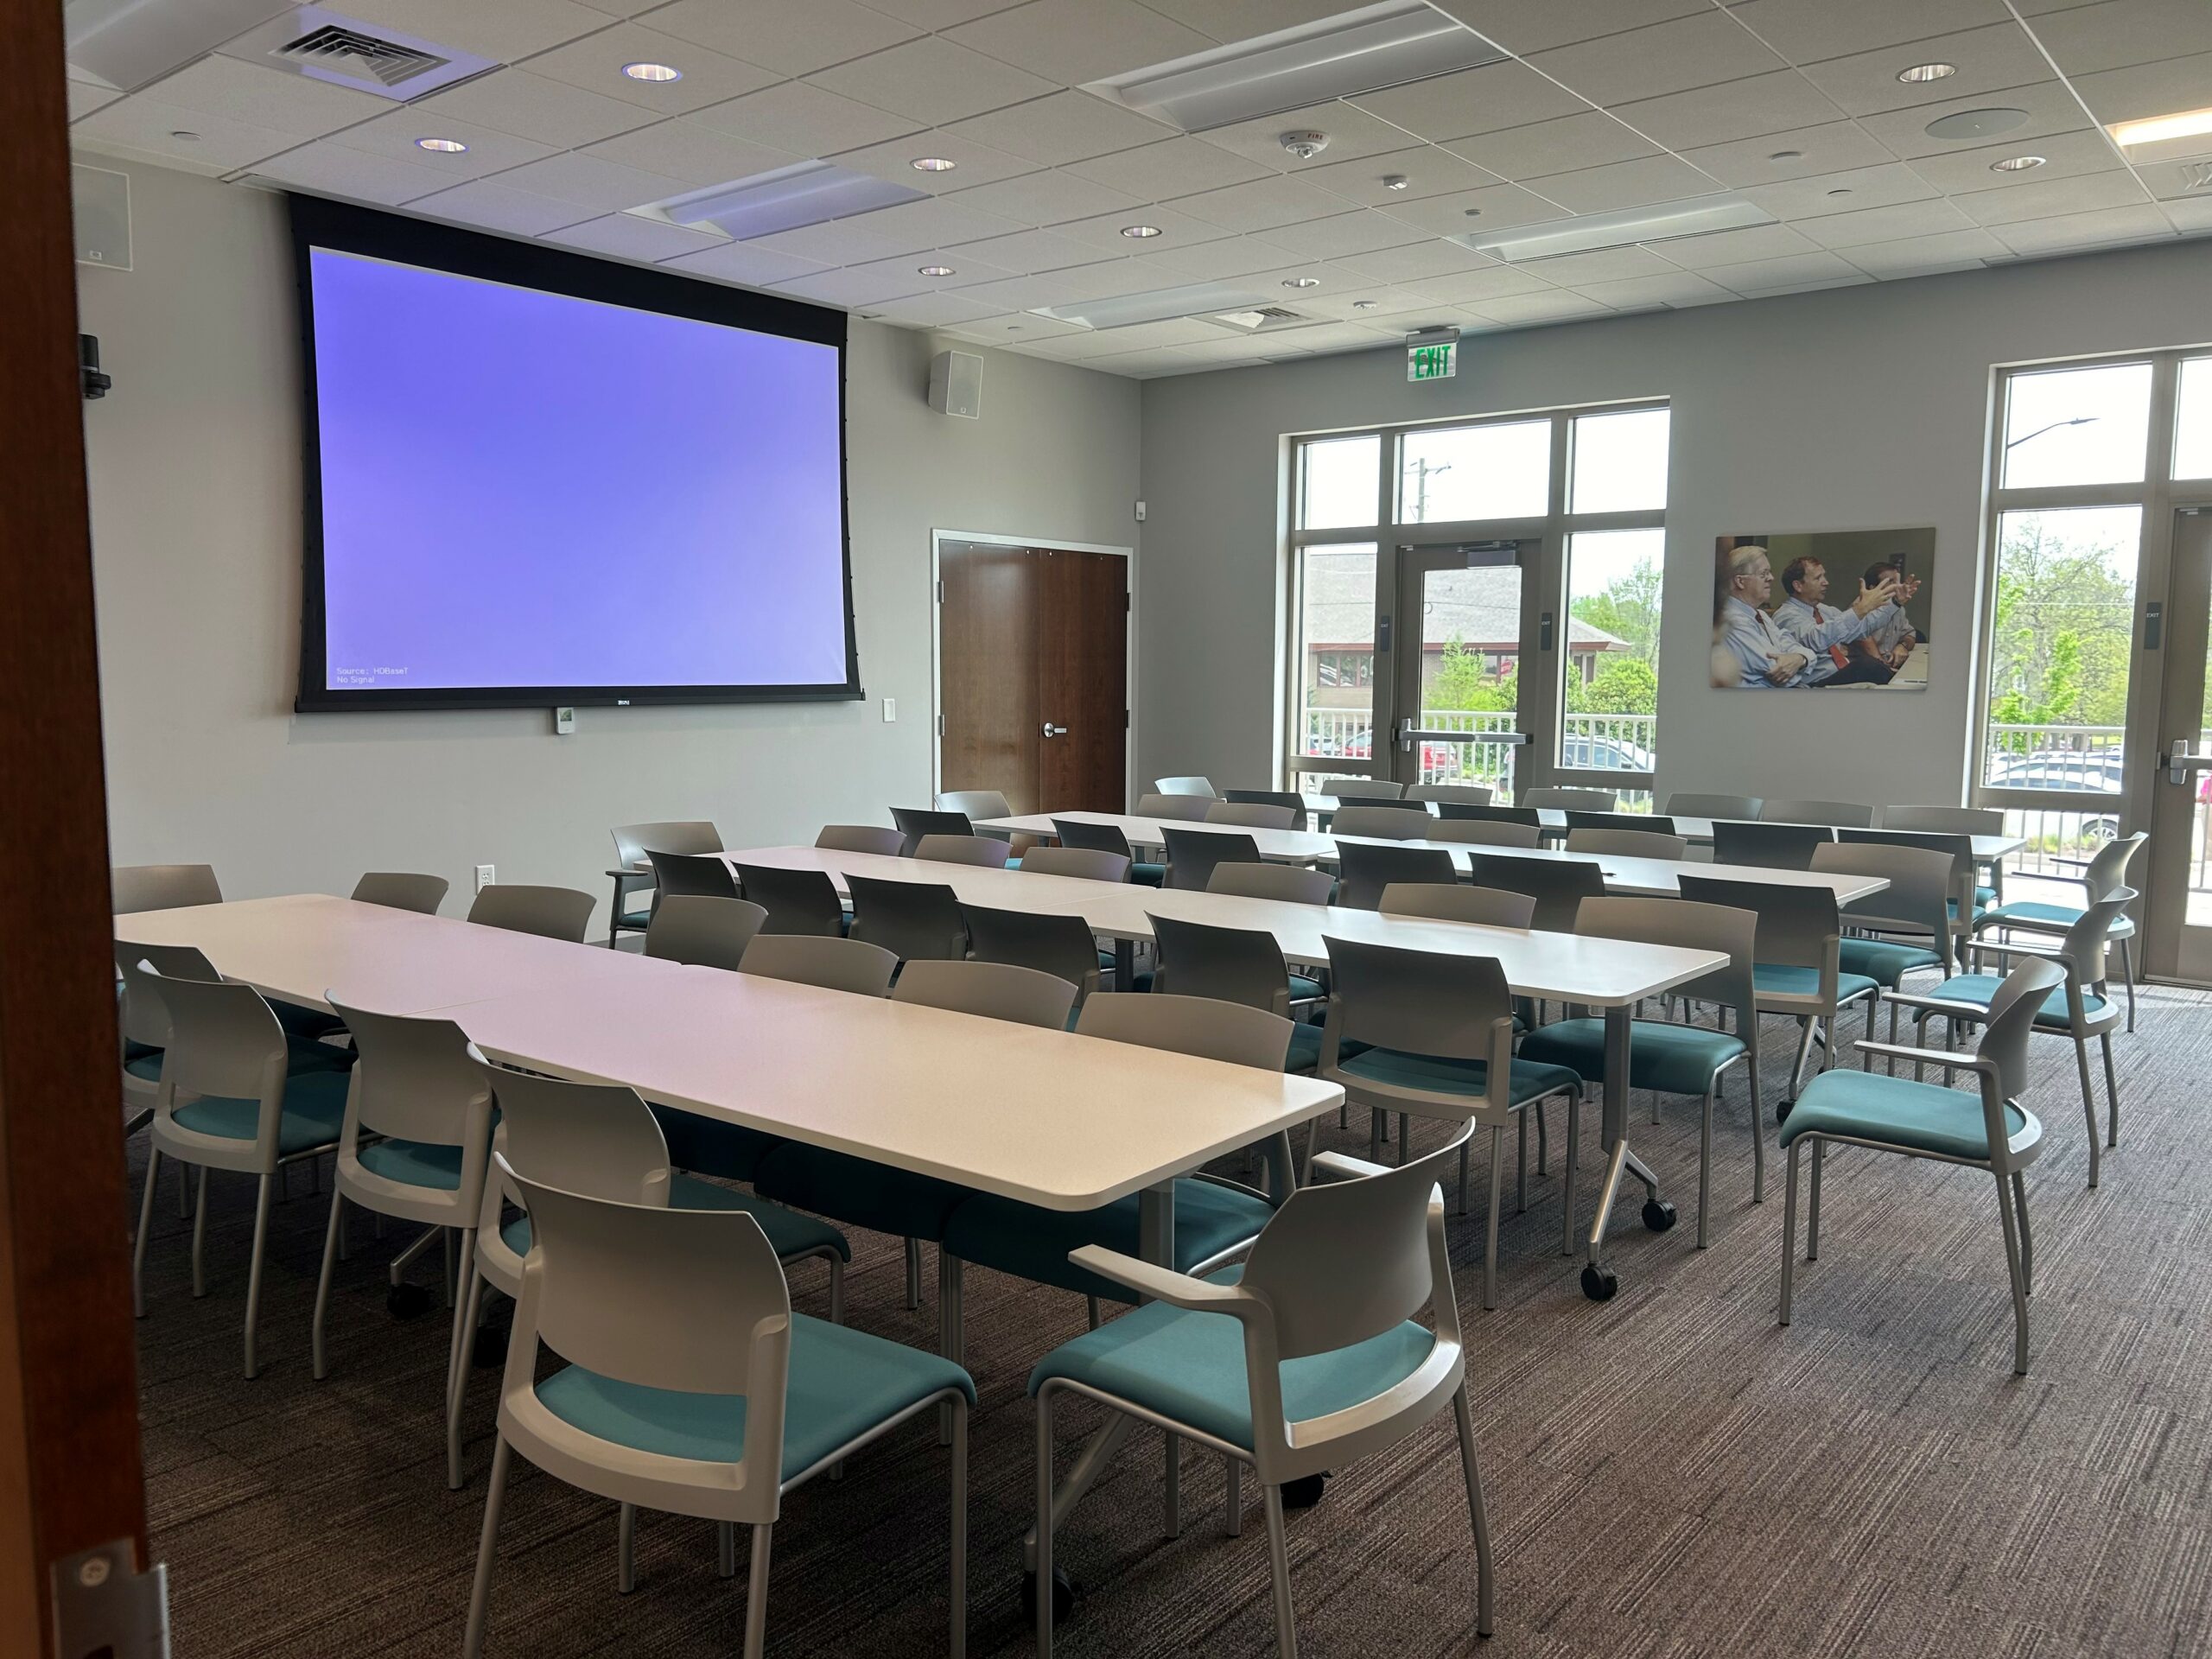 classroom style layout for a meeting room with tables and chairs set for 32